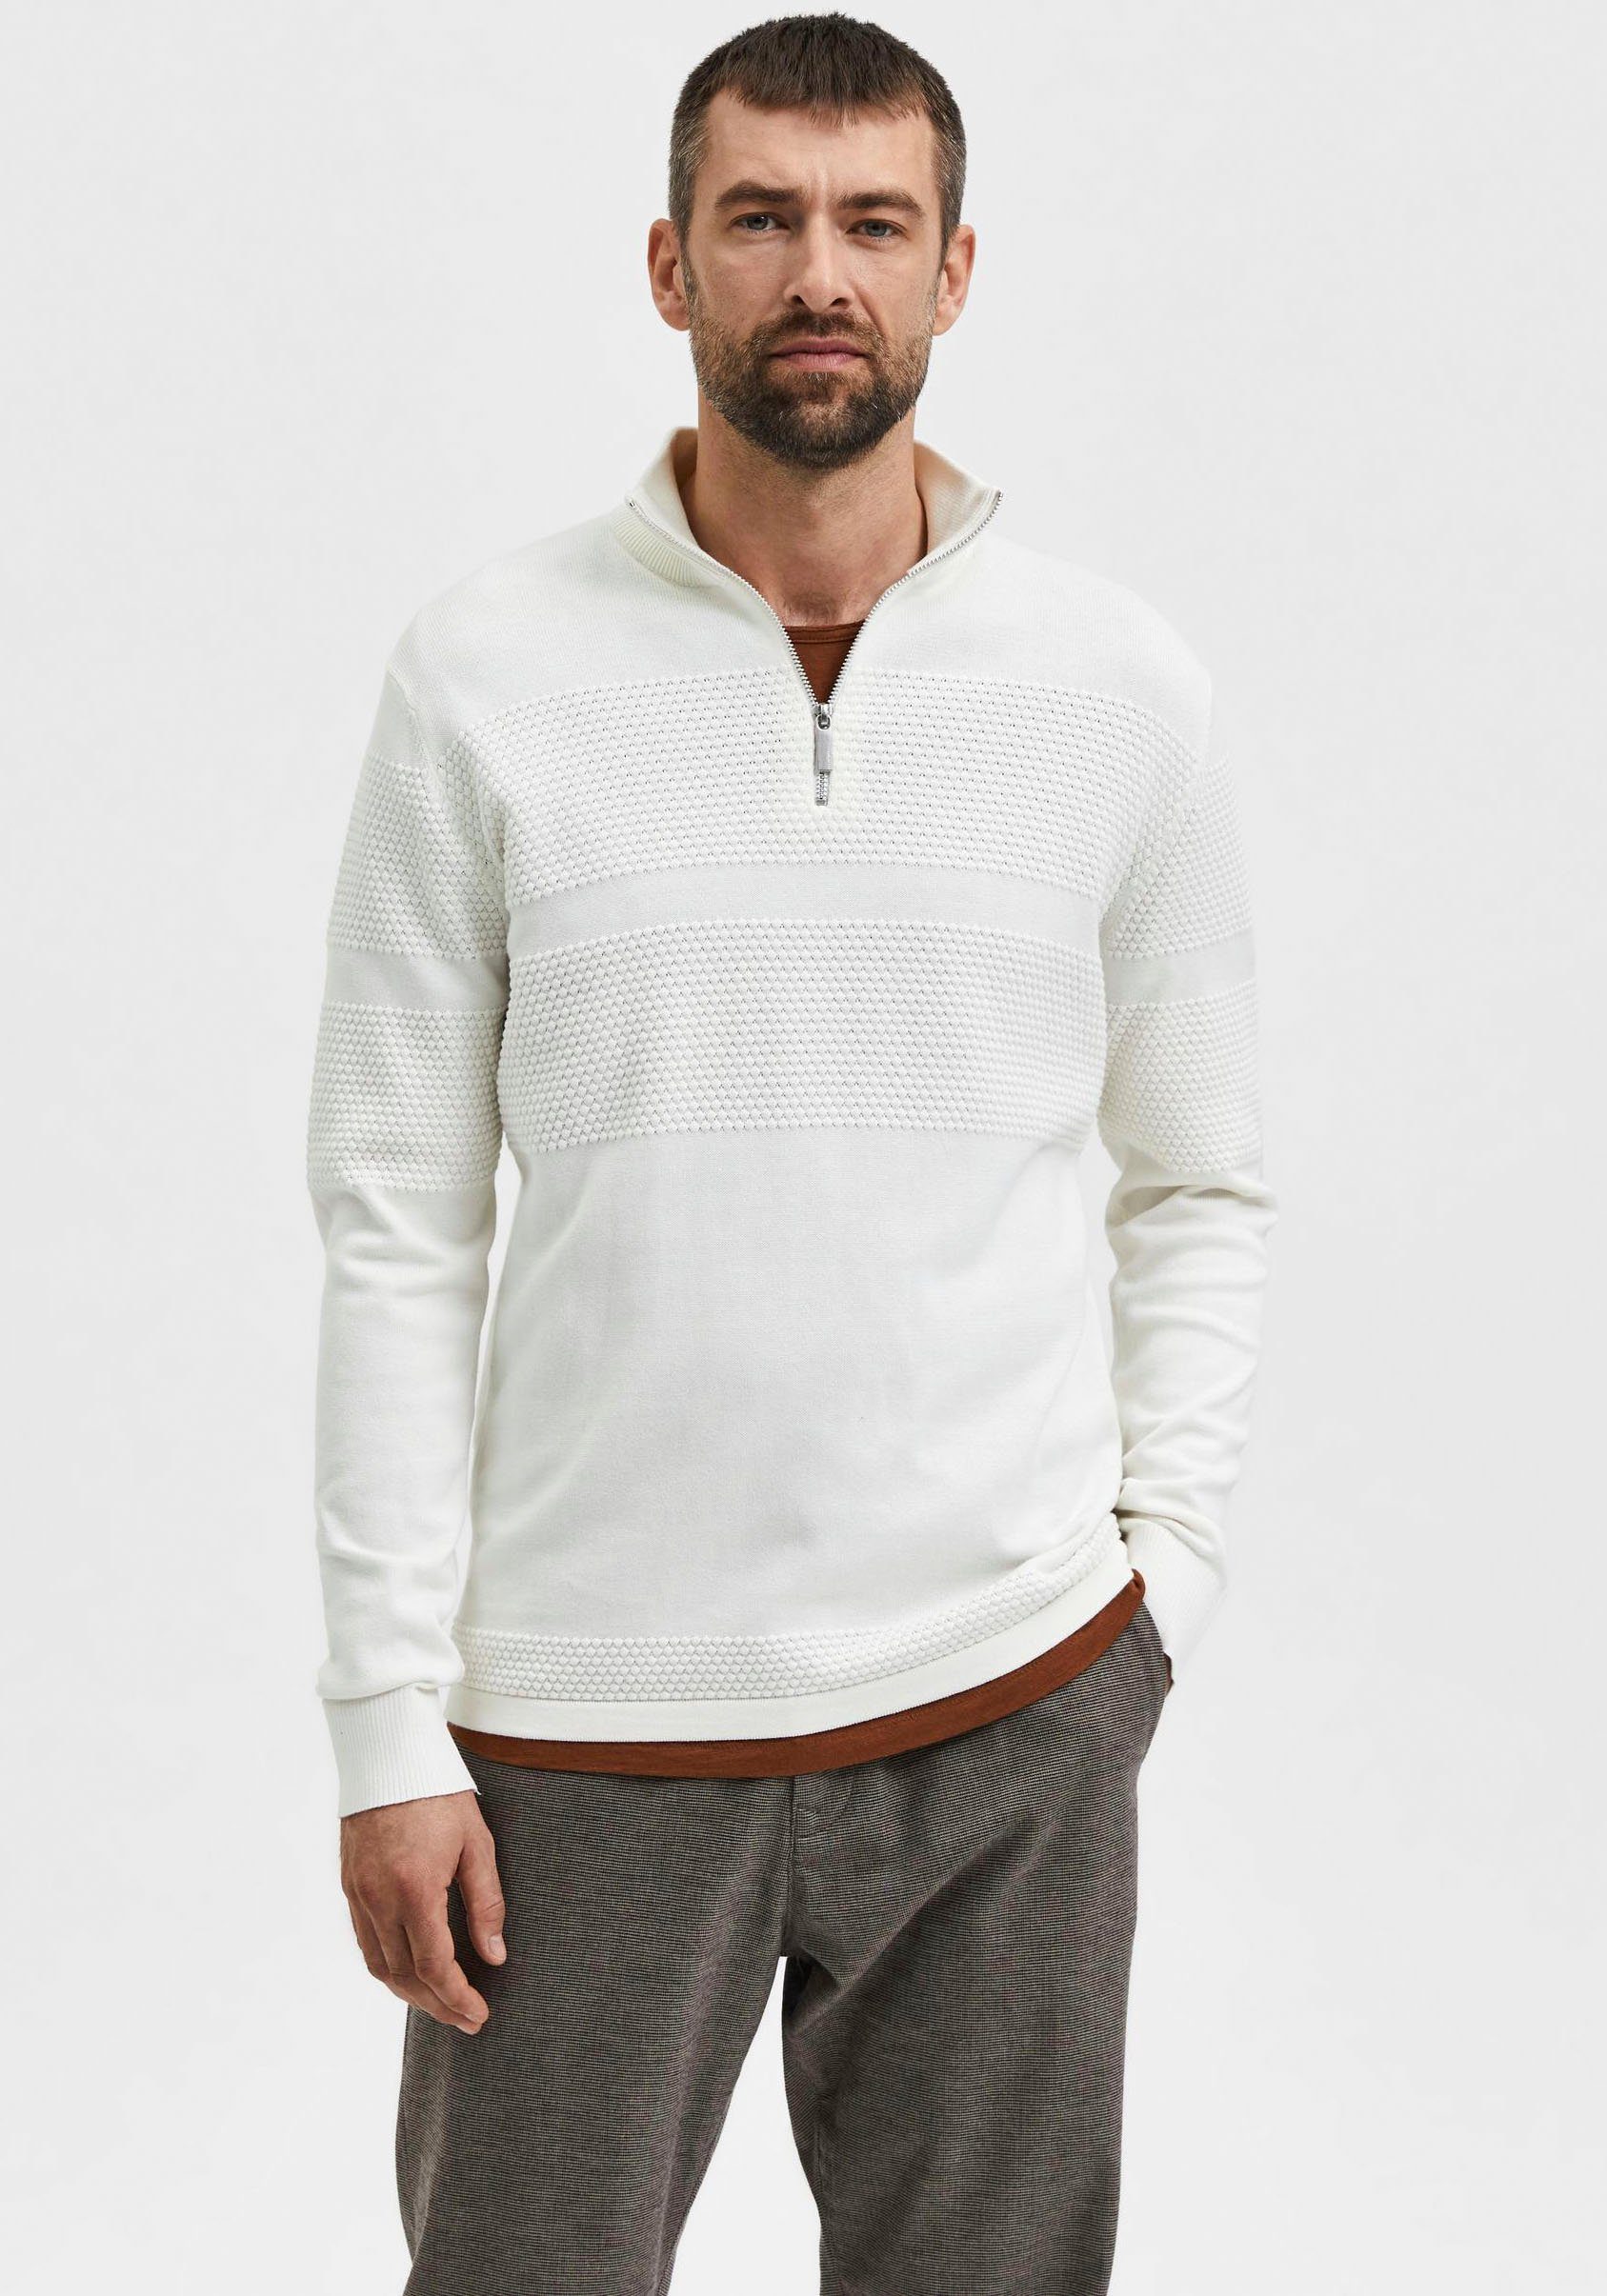 SELECTED MAINE ZIP, HOMME Troyer KNIT HALF Material Trageangenehmes